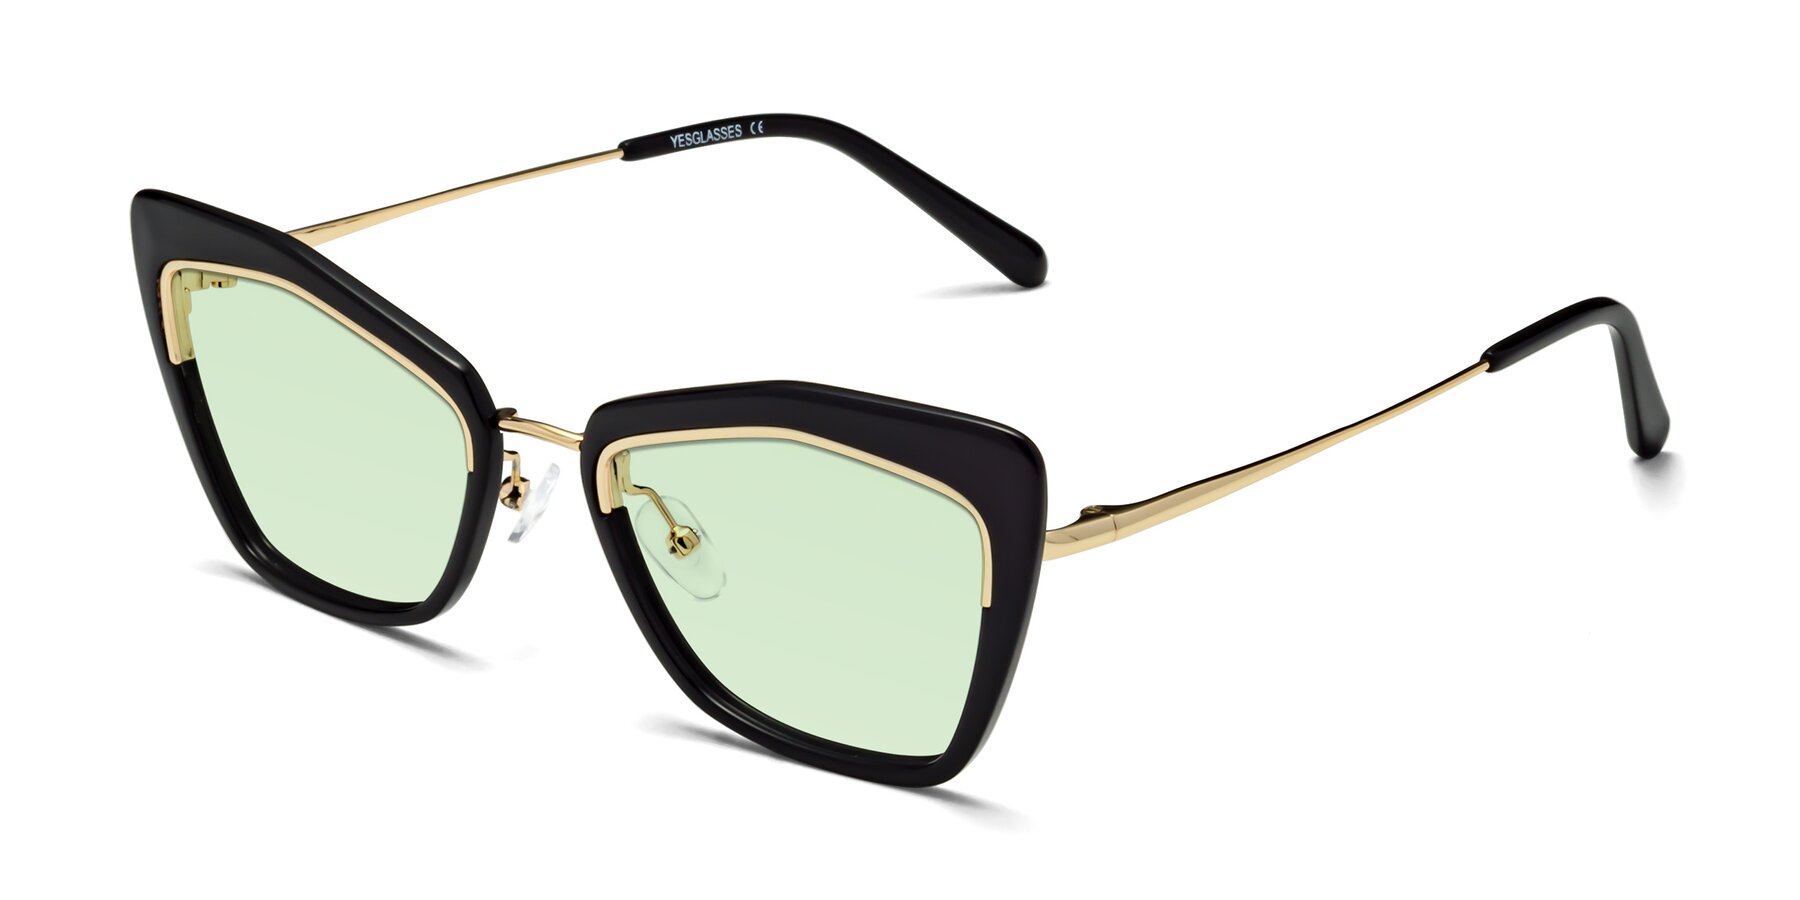 Angle of Lasso in Black with Light Green Tinted Lenses